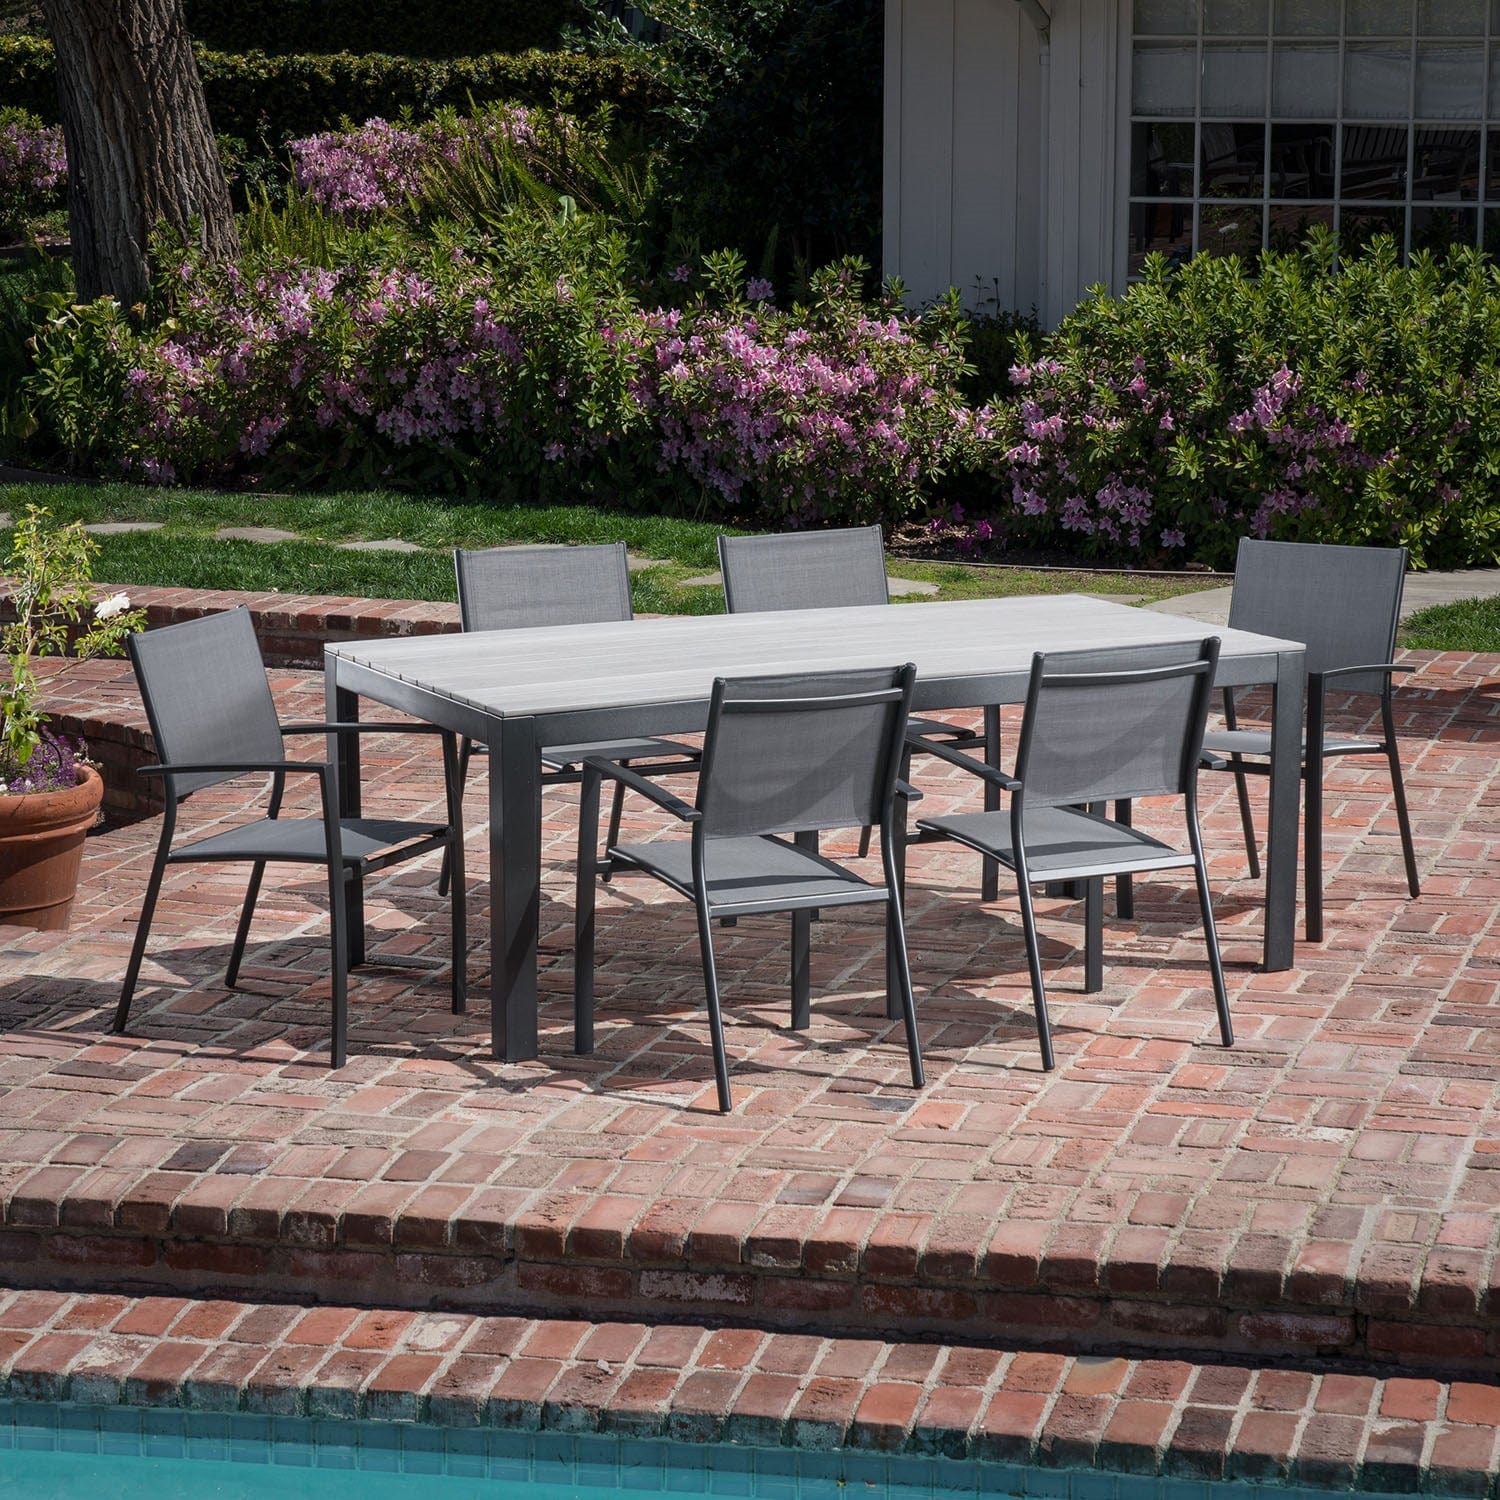 Hanover Outdoor Dining Set Hanover Tucson 7-Piece Aluminium Frame Dining Set with 6 Sling Arm Chairs and a Faux Wood Dining Table | TUCSDN7PC-GRY